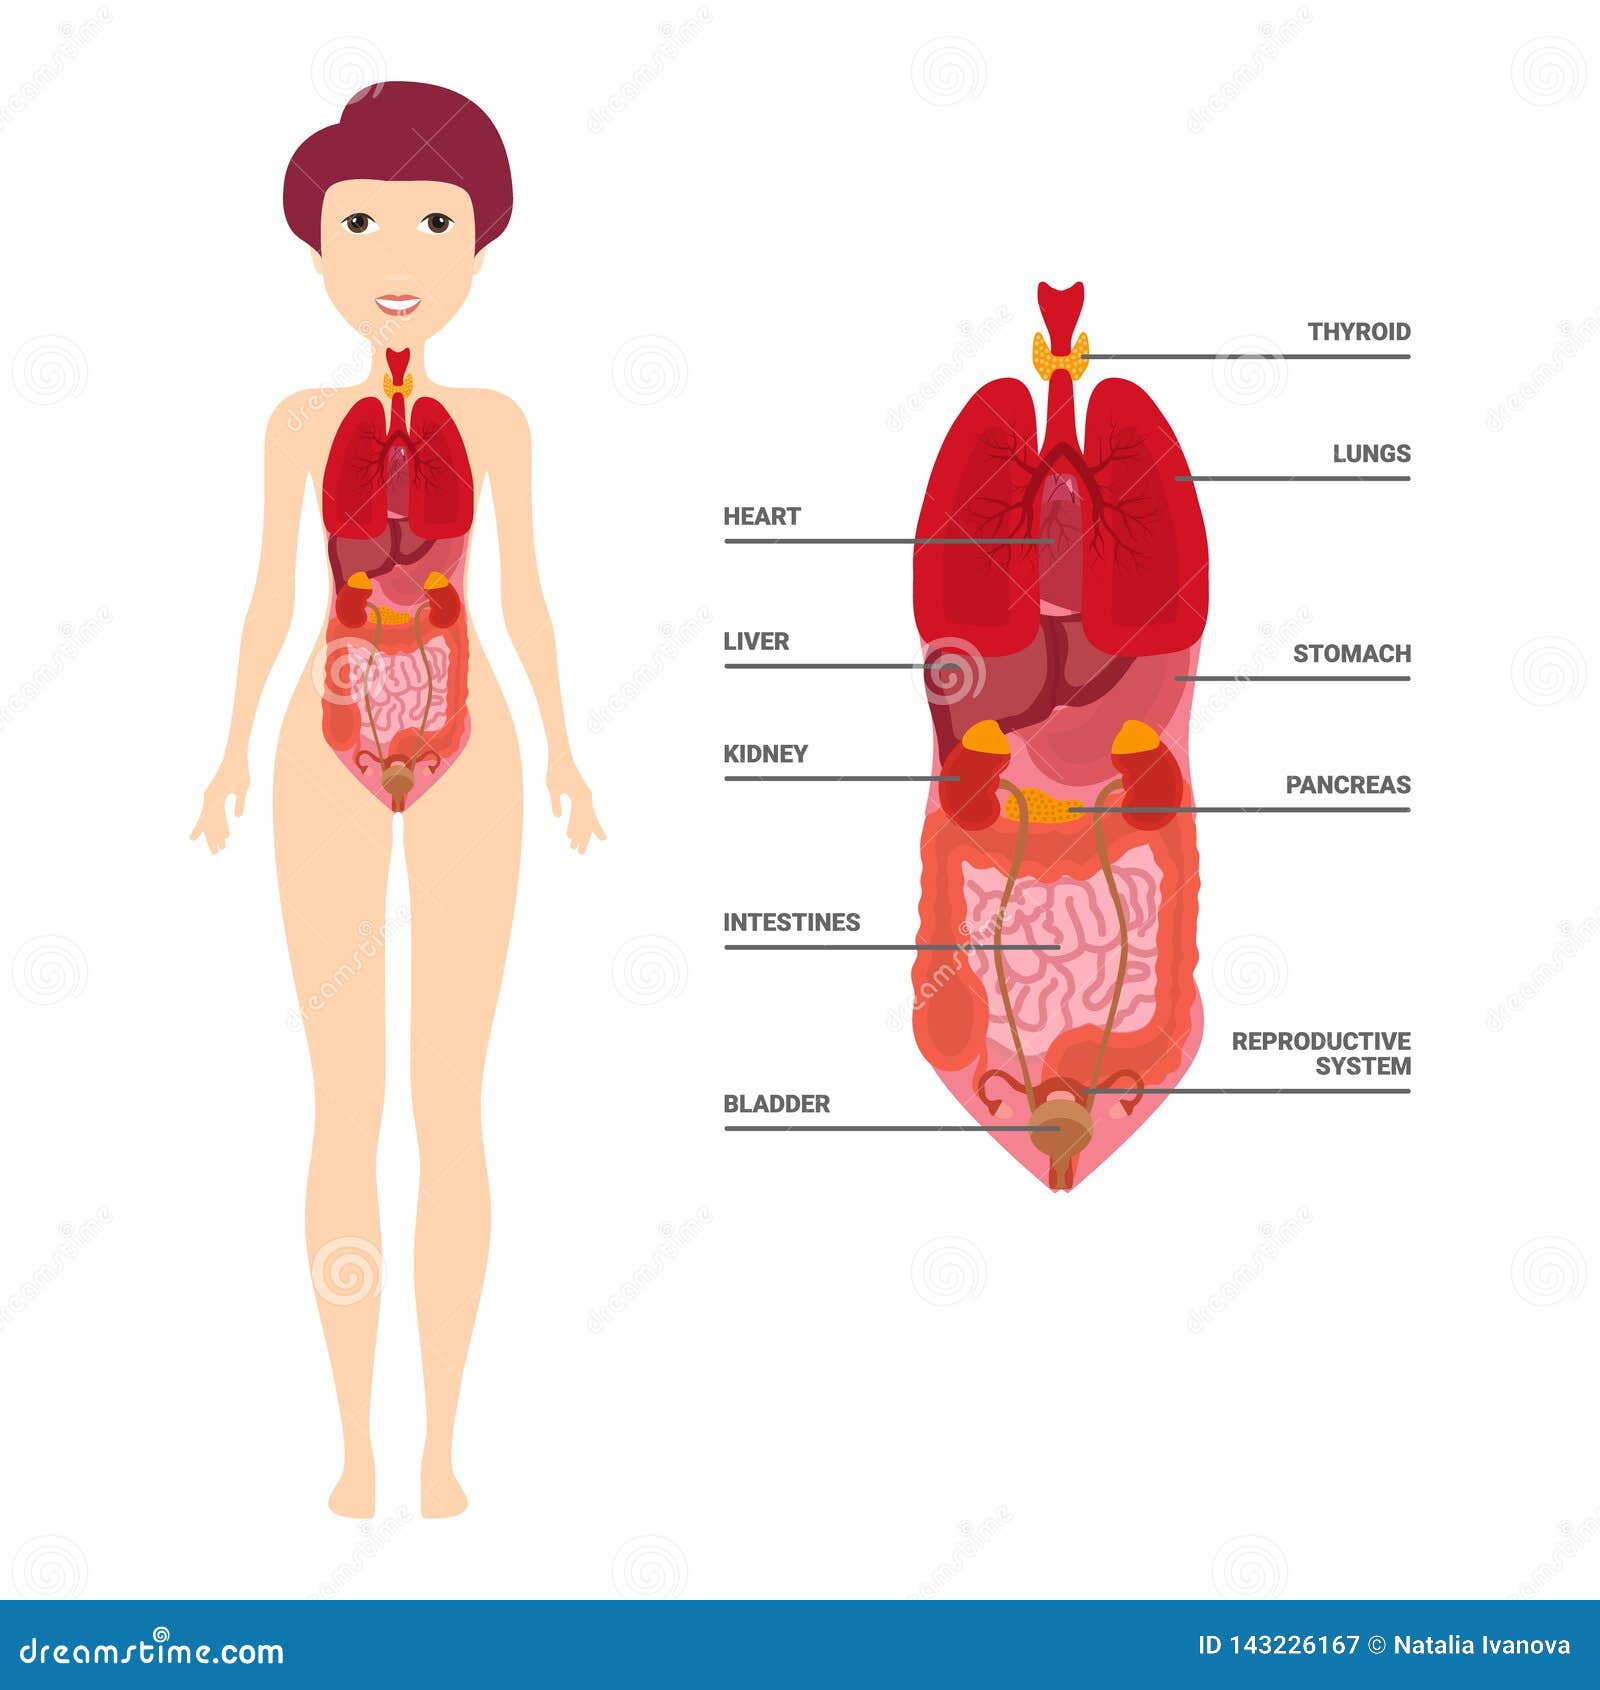 Female Human Anatomy Internal Organs Diagram Physiology Structure Medical Profession Morphology Healthy Stock Vector Illustration Of Life Abdominal 143226167